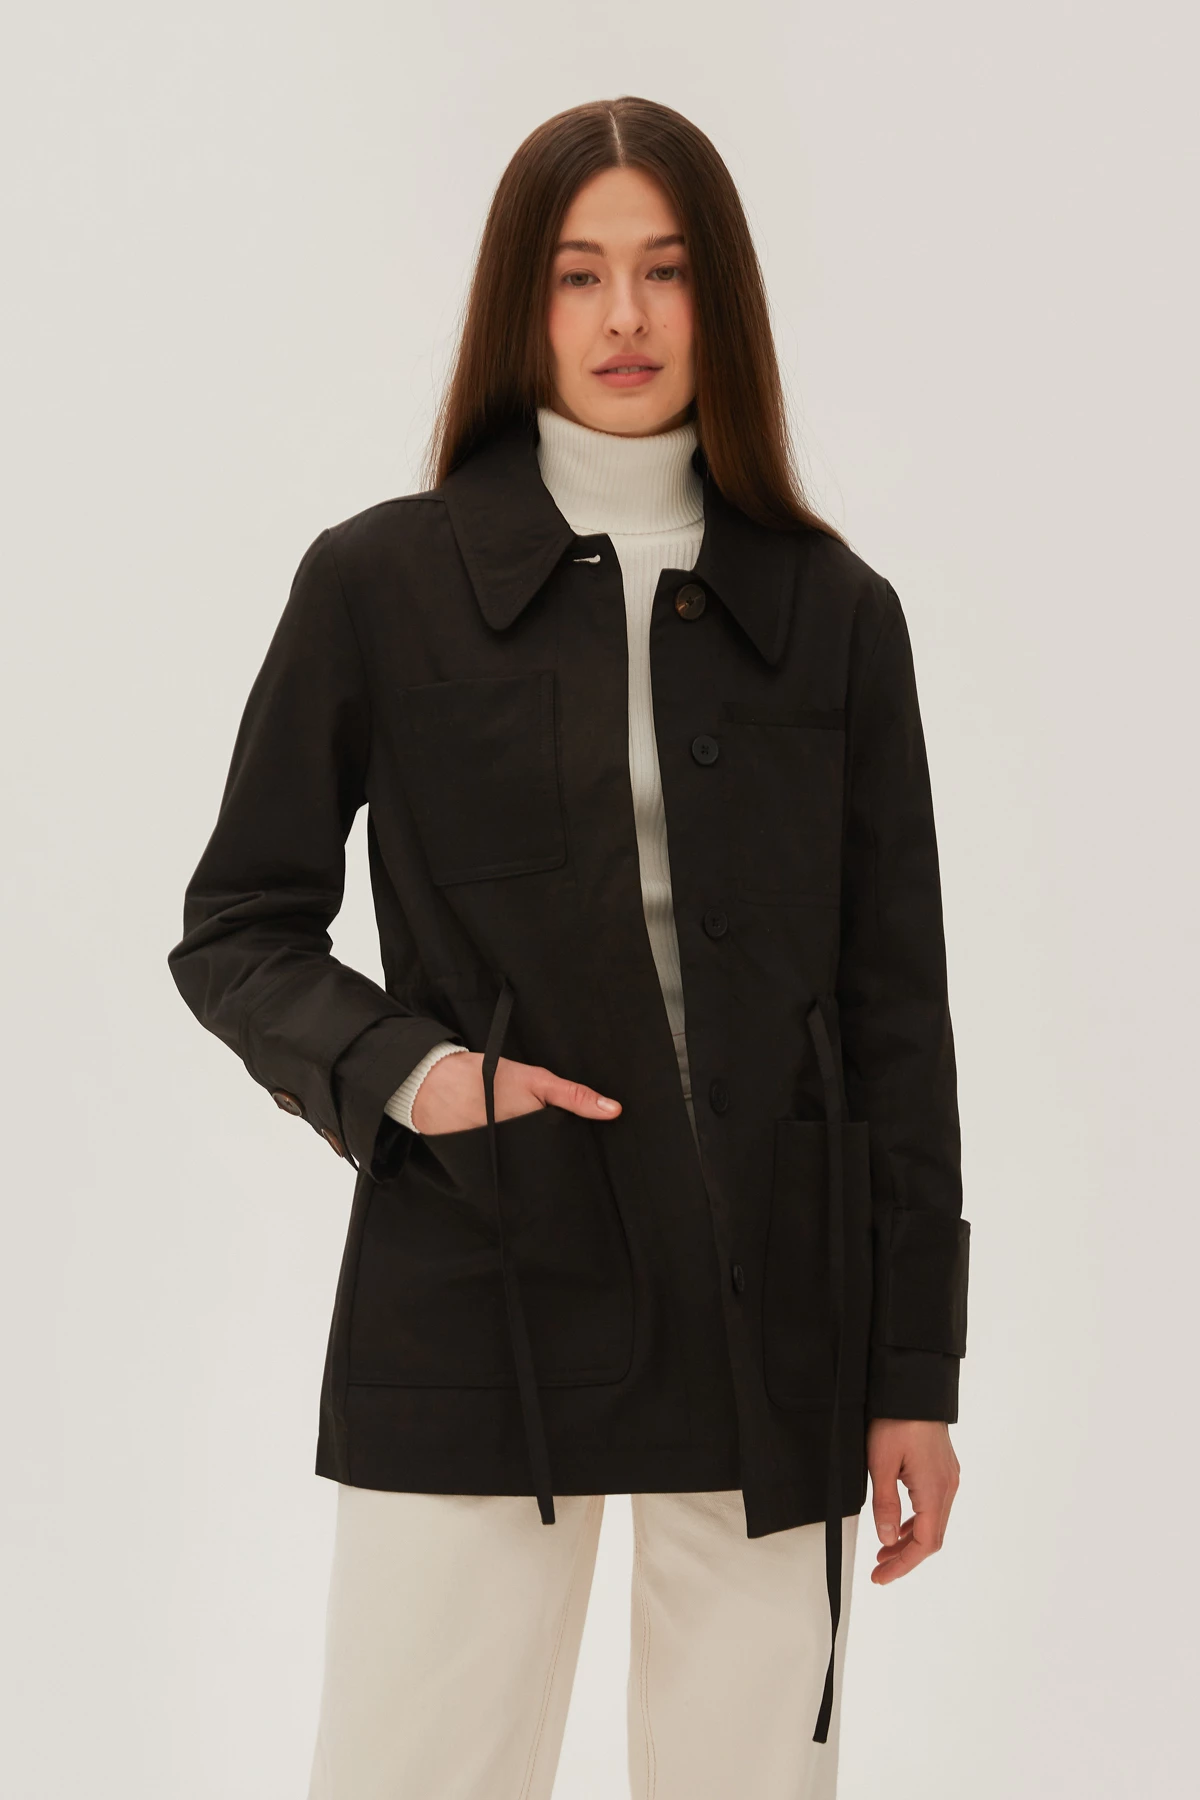 Short jacket with raincoat fabric in black color, photo 7